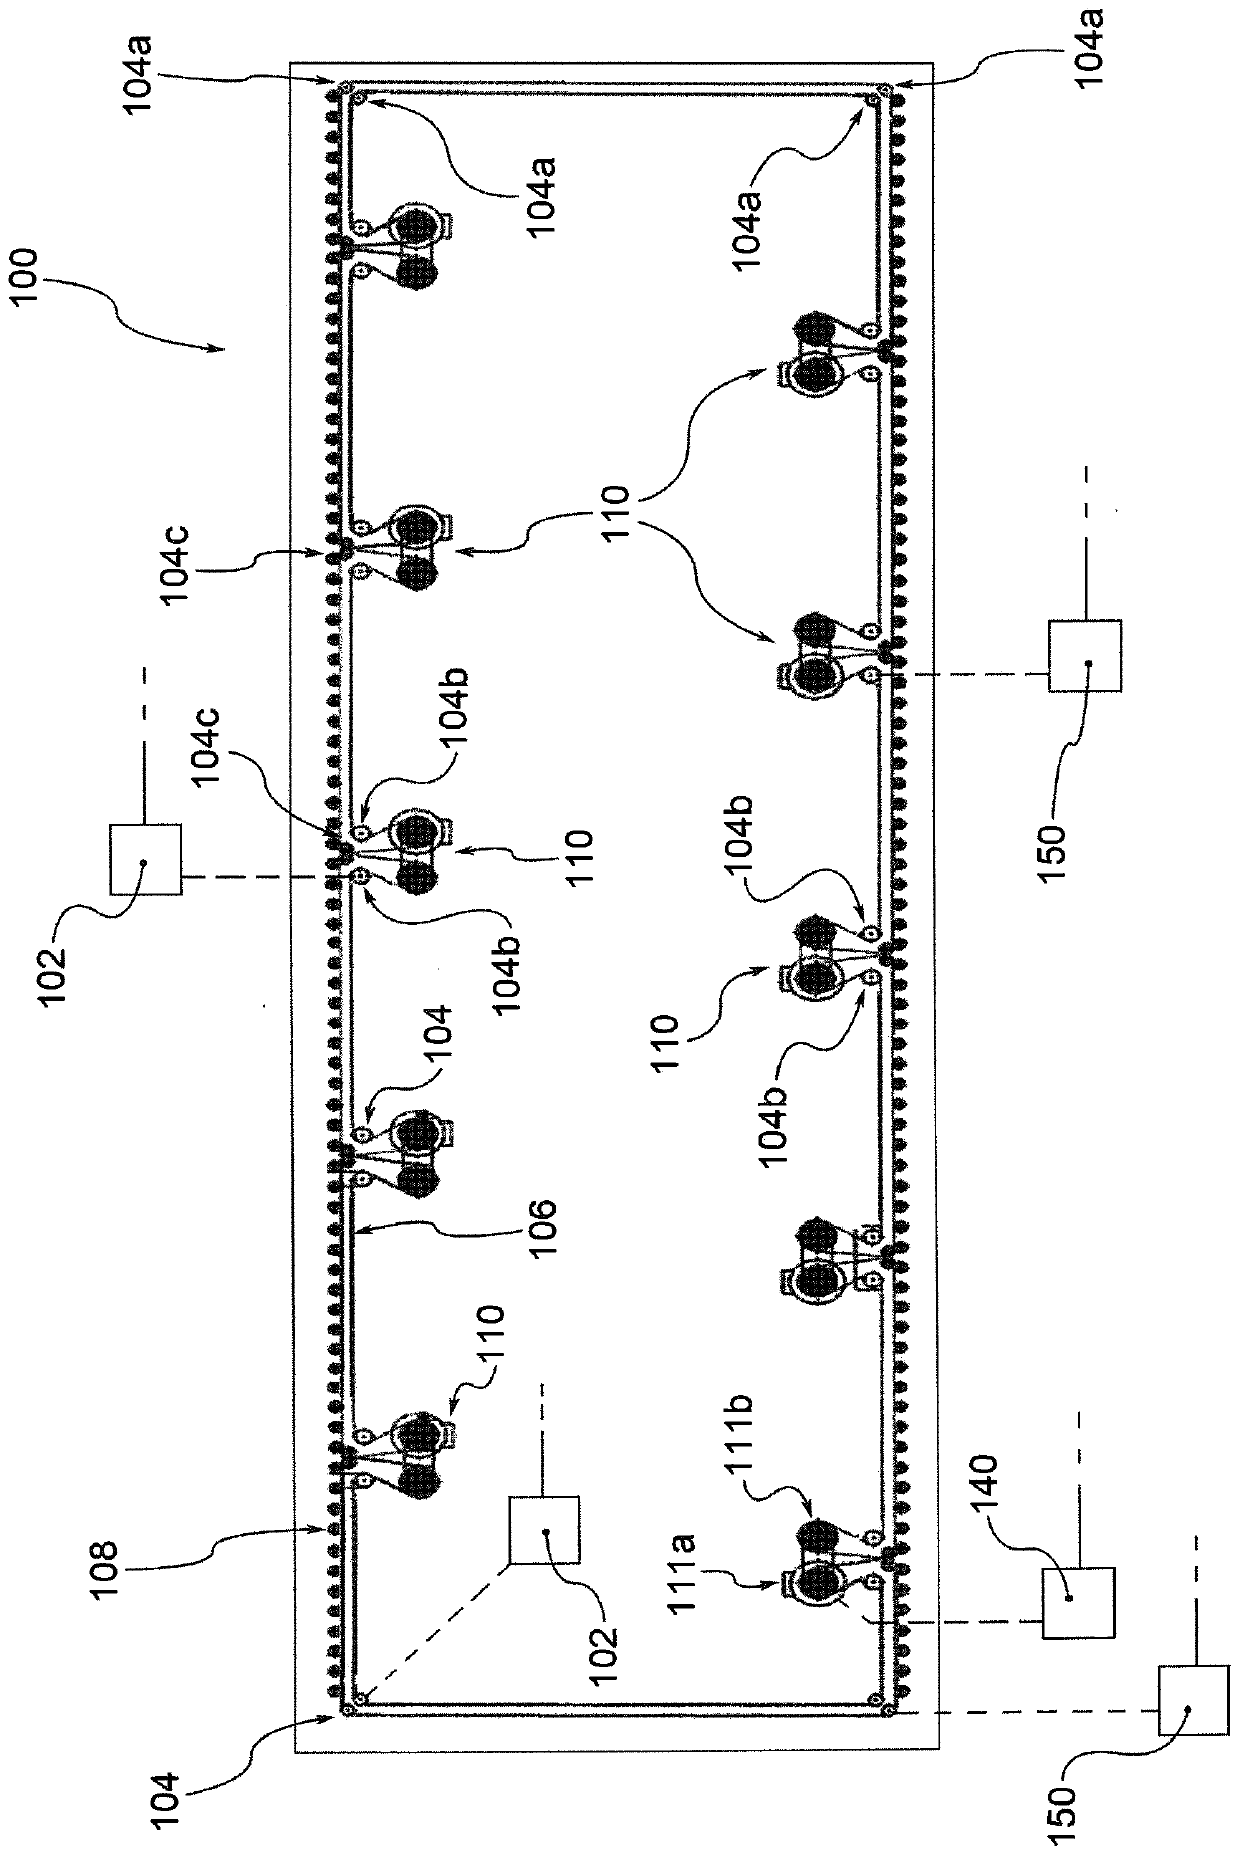 System for monitoring physical parameters of textile machinery and method for predictive maintenance